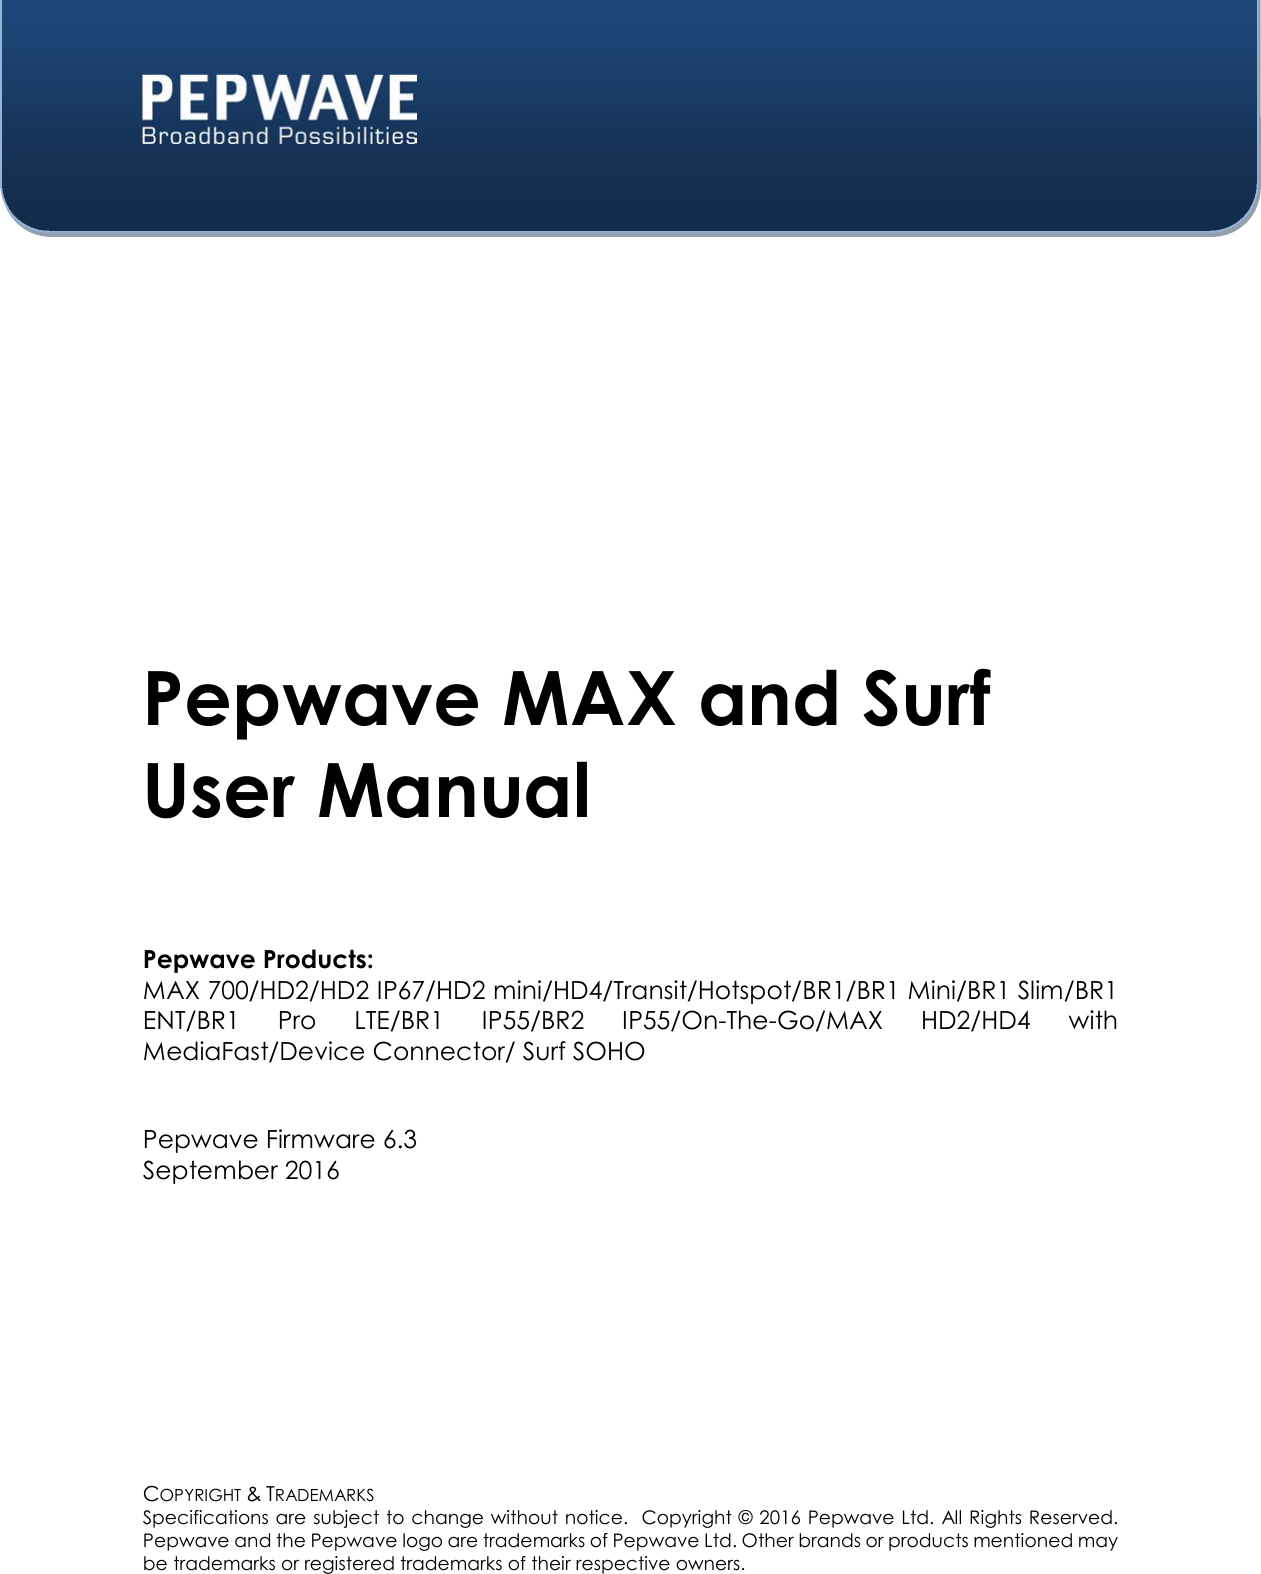  COPYRIGHT &amp; TRADEMARKS Specifications are subject to change without notice.  Copyright © 2016 Pepwave Ltd. All Rights Reserved.  Pepwave and the Pepwave logo are trademarks of Pepwave Ltd. Other brands or products mentioned may be trademarks or registered trademarks of their respective owners.    Pepwave MAX and Surf User Manual  Pepwave Products: MAX 700/HD2/HD2 IP67/HD2 mini/HD4/Transit/Hotspot/BR1/BR1 Mini/BR1 Slim/BR1 ENT/BR1  Pro  LTE/BR1  IP55/BR2  IP55/On-The-Go/MAX  HD2/HD4  with MediaFast/Device Connector/ Surf SOHO   Pepwave Firmware 6.3 September 2016